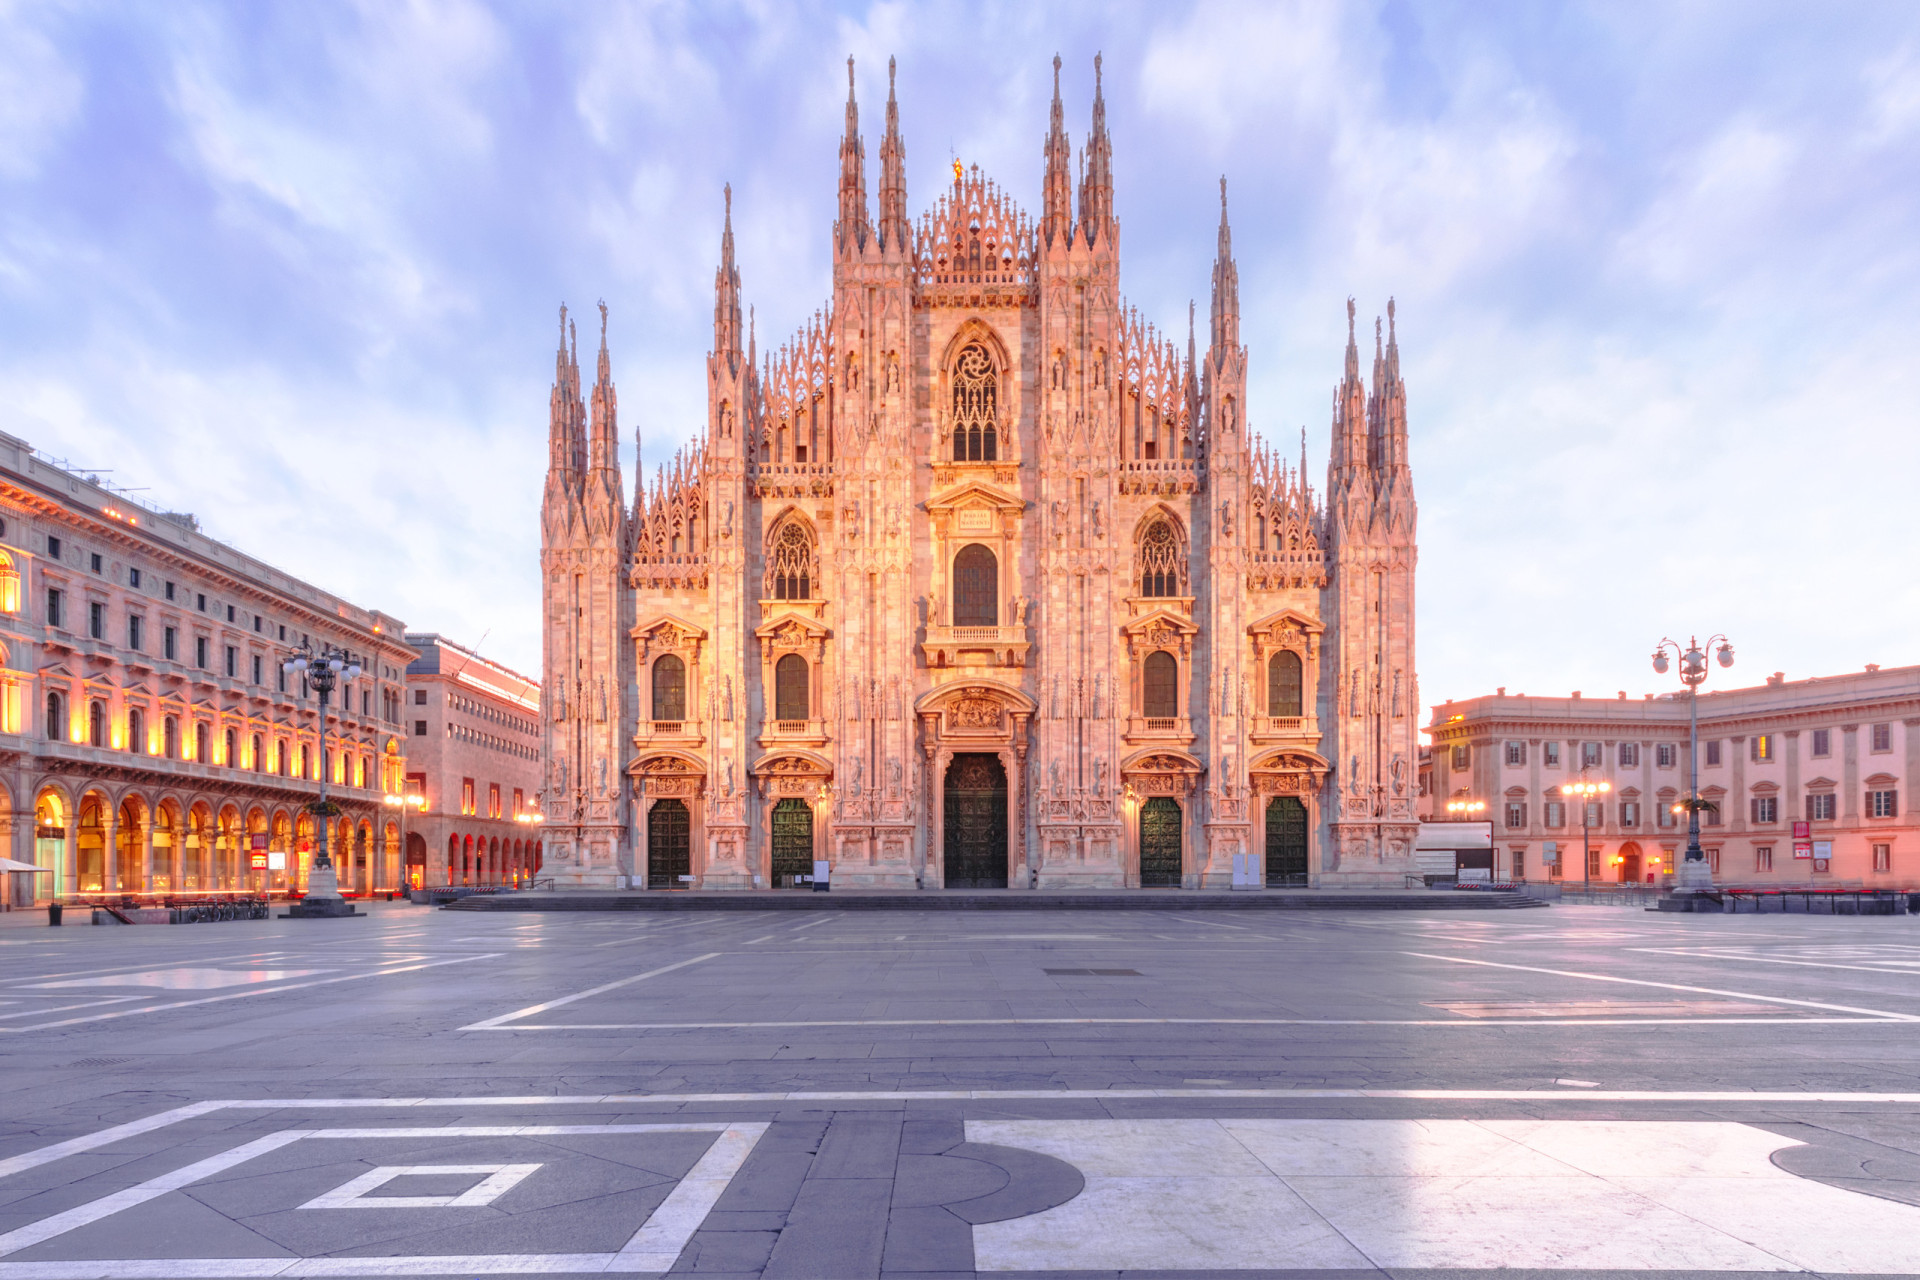 <p><span>Outside of Rome, the Duomo di Milano in Milan </span><span>is often reported</span><span> as having the highest volume of stolen personal items, according to online travel reviews.</span></p><p><a href="https://www.msn.com/en-us/community/channel/vid-7xx8mnucu55yw63we9va2gwr7uihbxwc68fxqp25x6tg4ftibpra?cvid=94631541bc0f4f89bfd59158d696ad7e">Follow us and access great exclusive content every day</a></p>